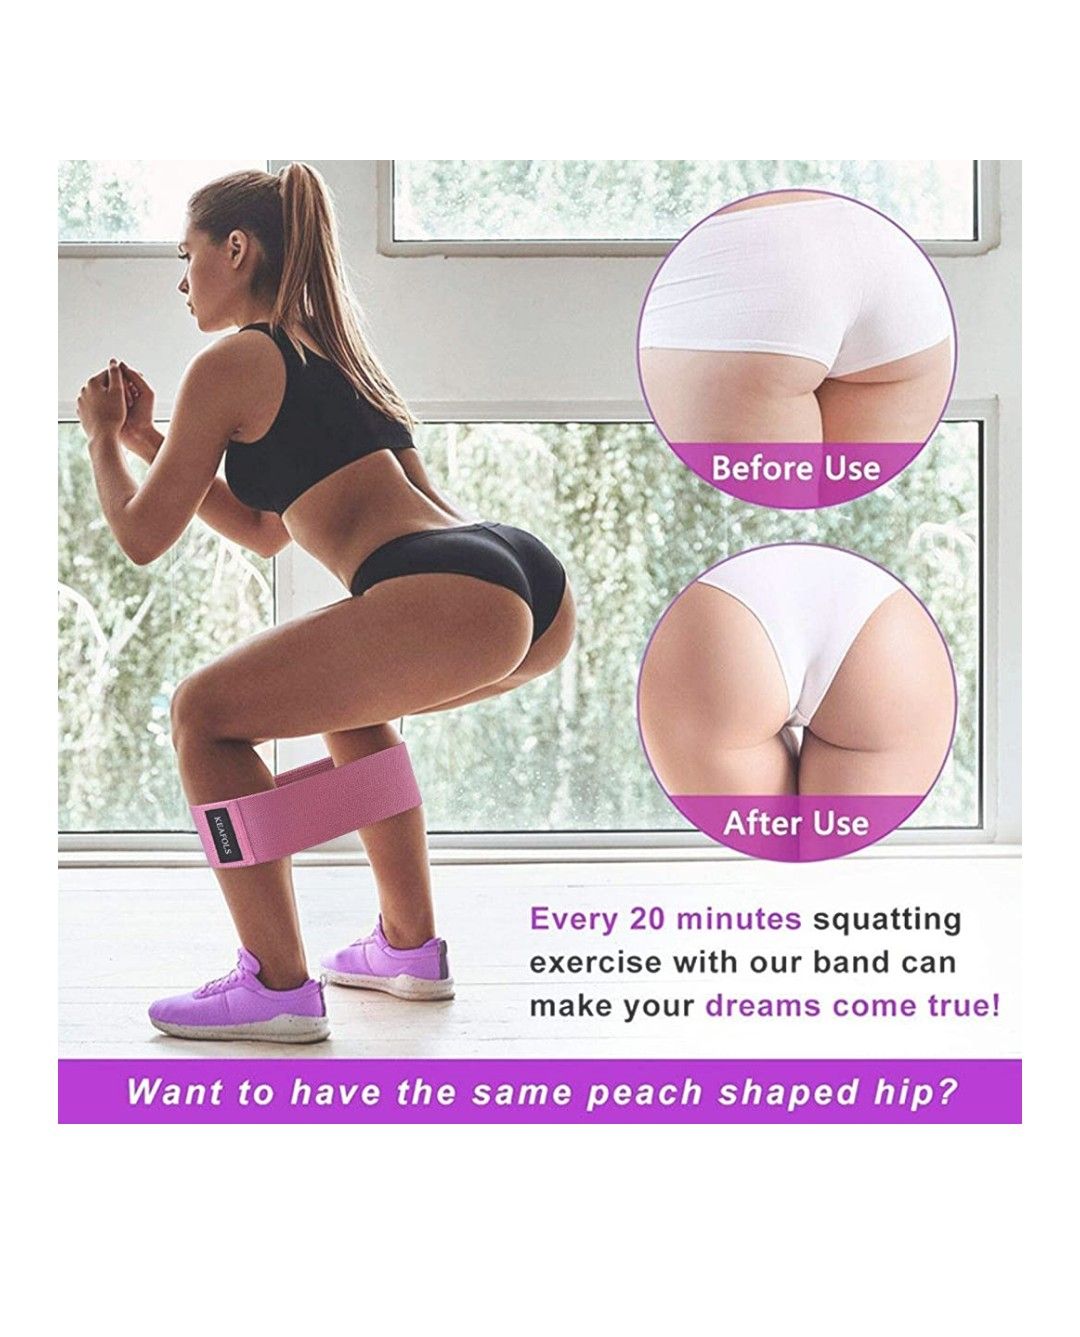 Exercise Resistance Bands for Legs Butts 3 Pack Non-Slip Fabric Workout Bands Booty Bands for Fitness Thigh Squat Glute Hip Training